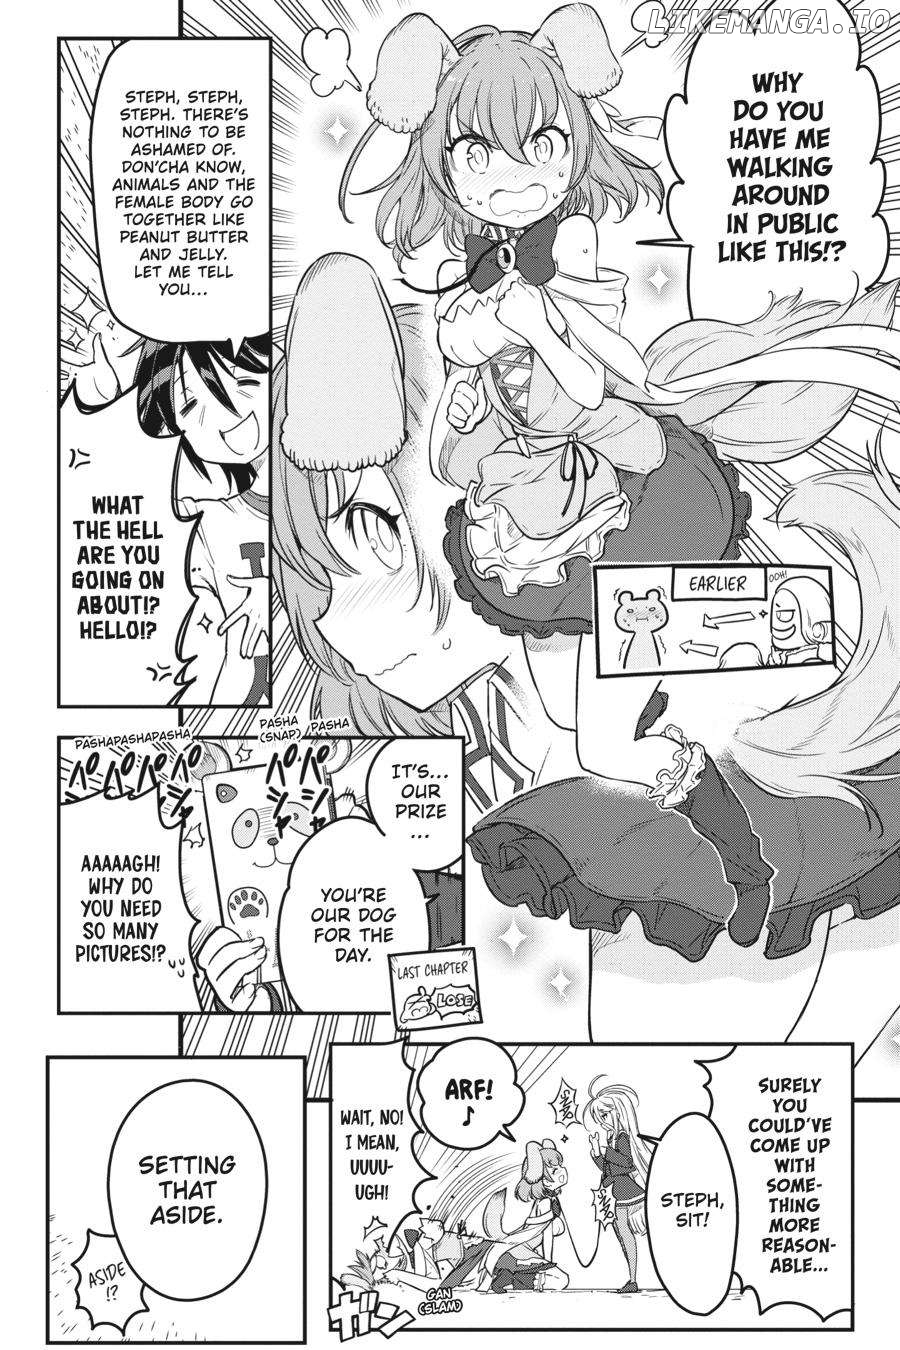 No Game No Life Chapter 2 - Eastern Union Arc Chapter 2 - page 5